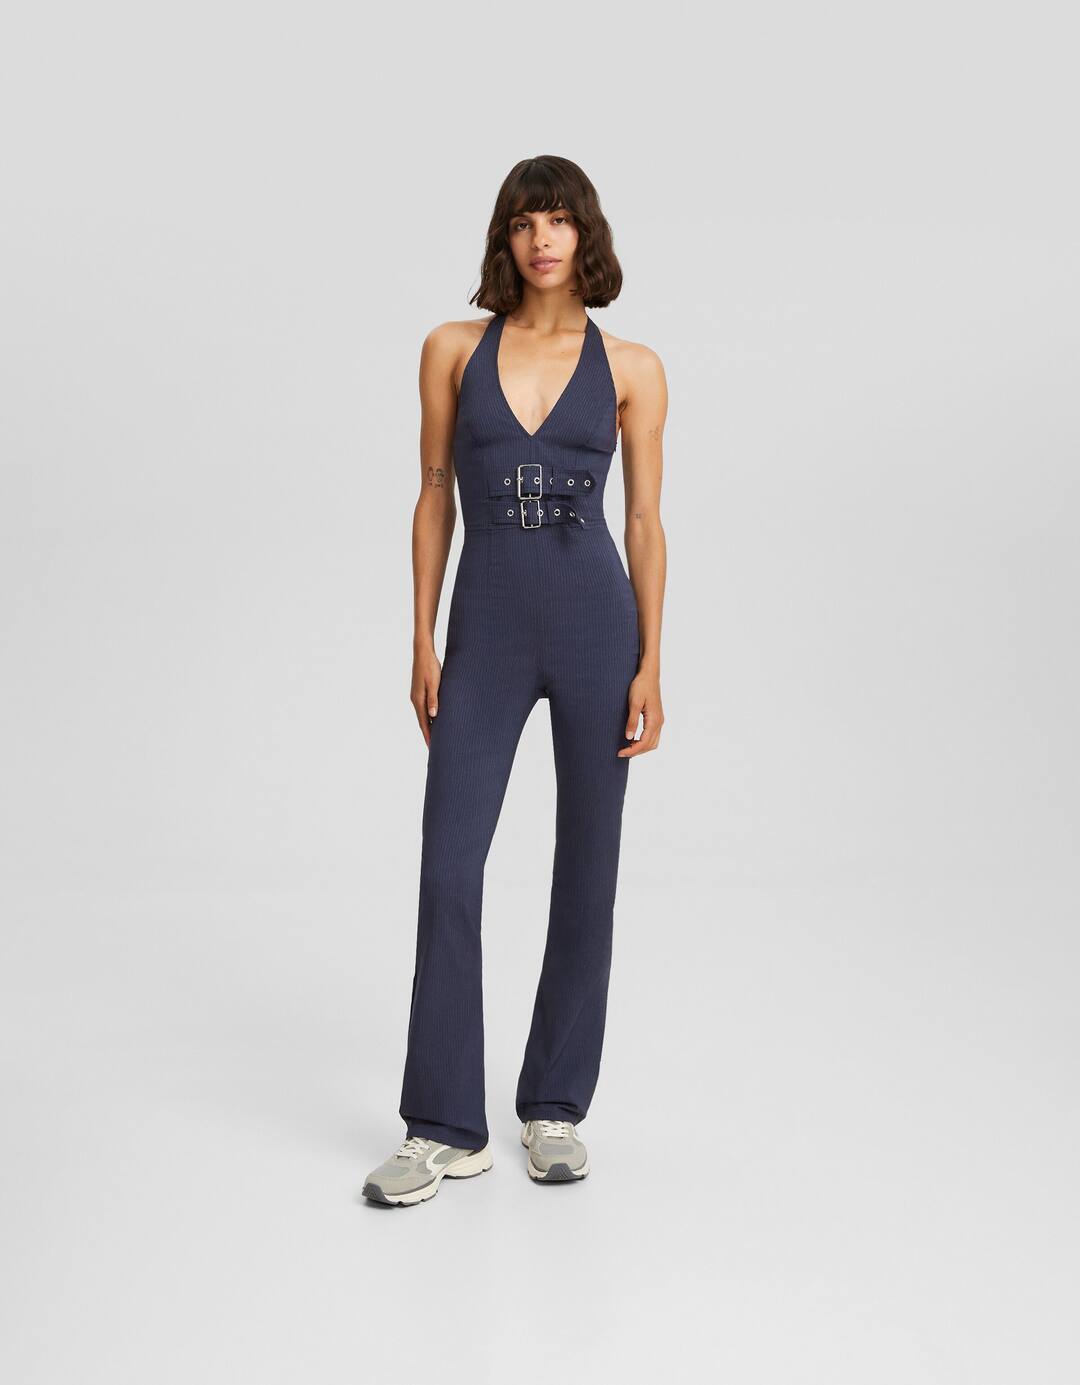 Fitted pinstripe jumpsuit with buckles